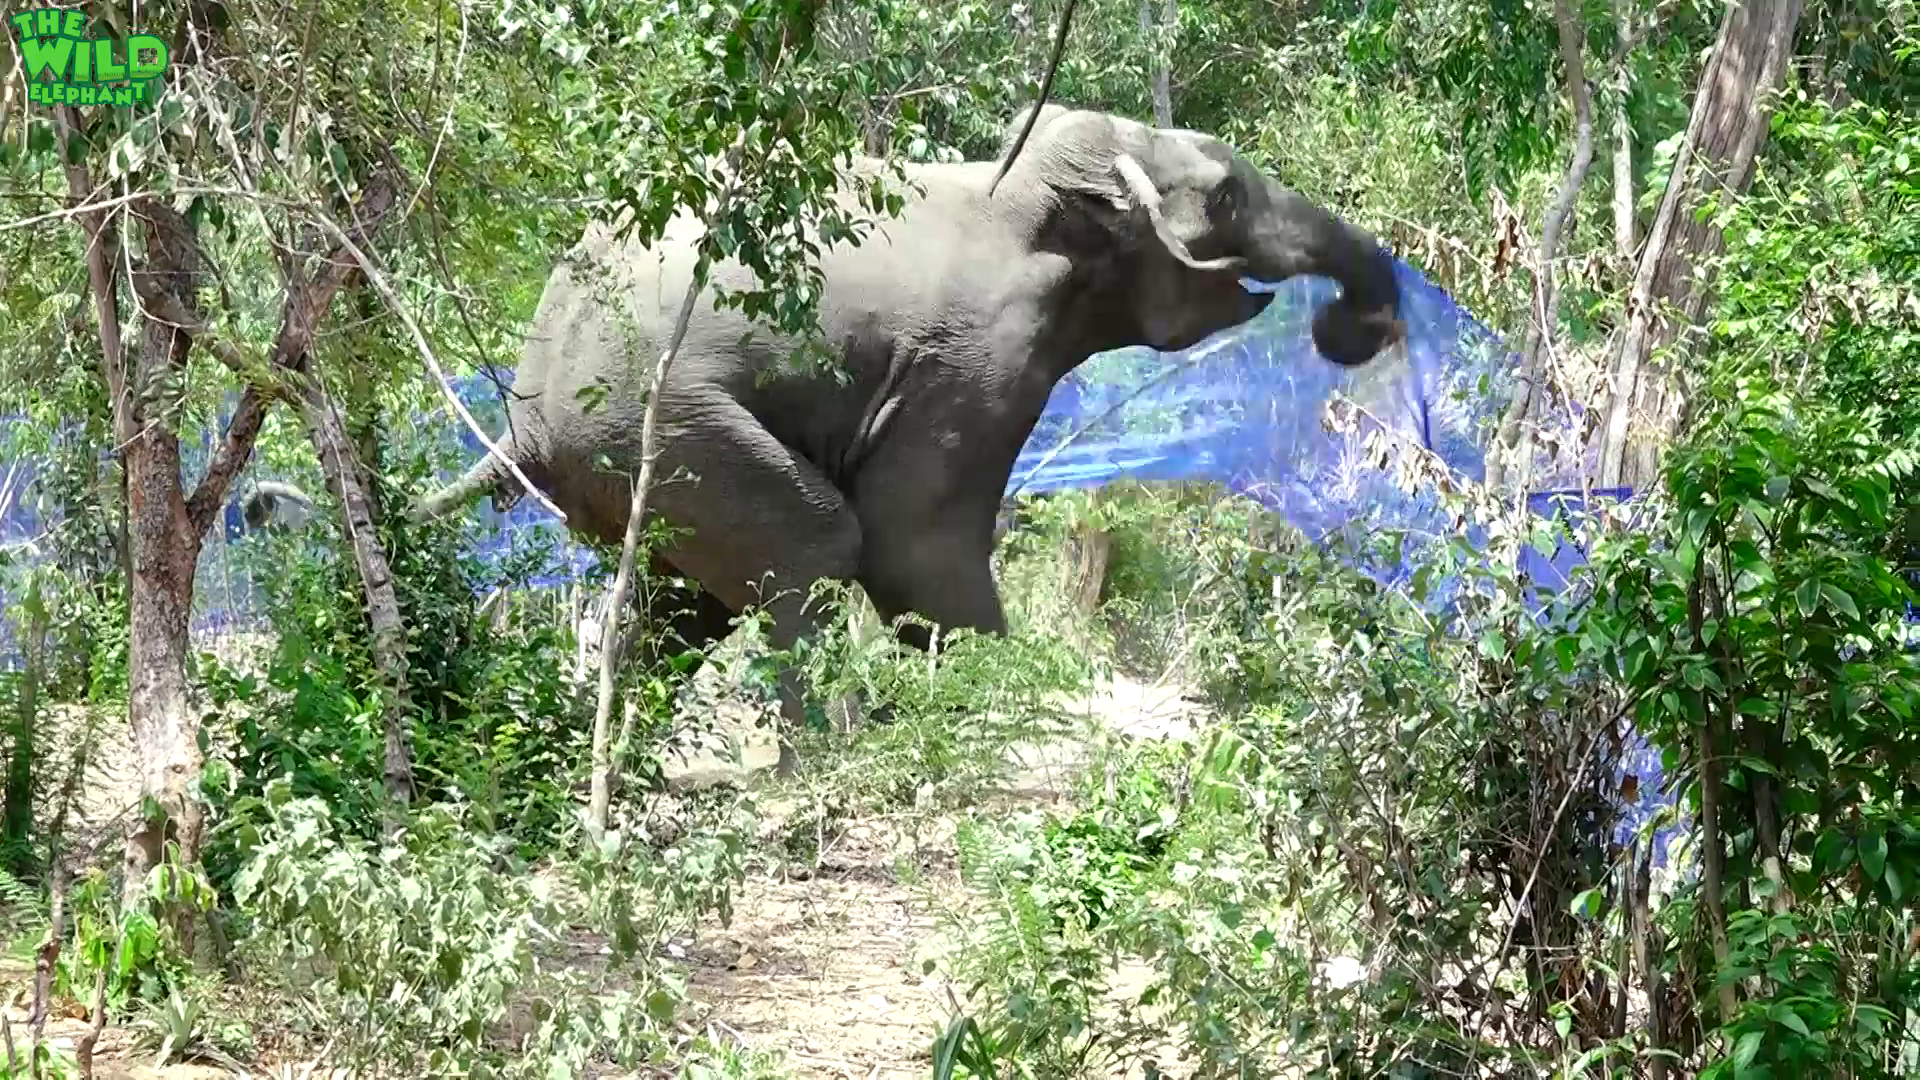 Humans to the Rescue! Elephant shot in the leg being saved